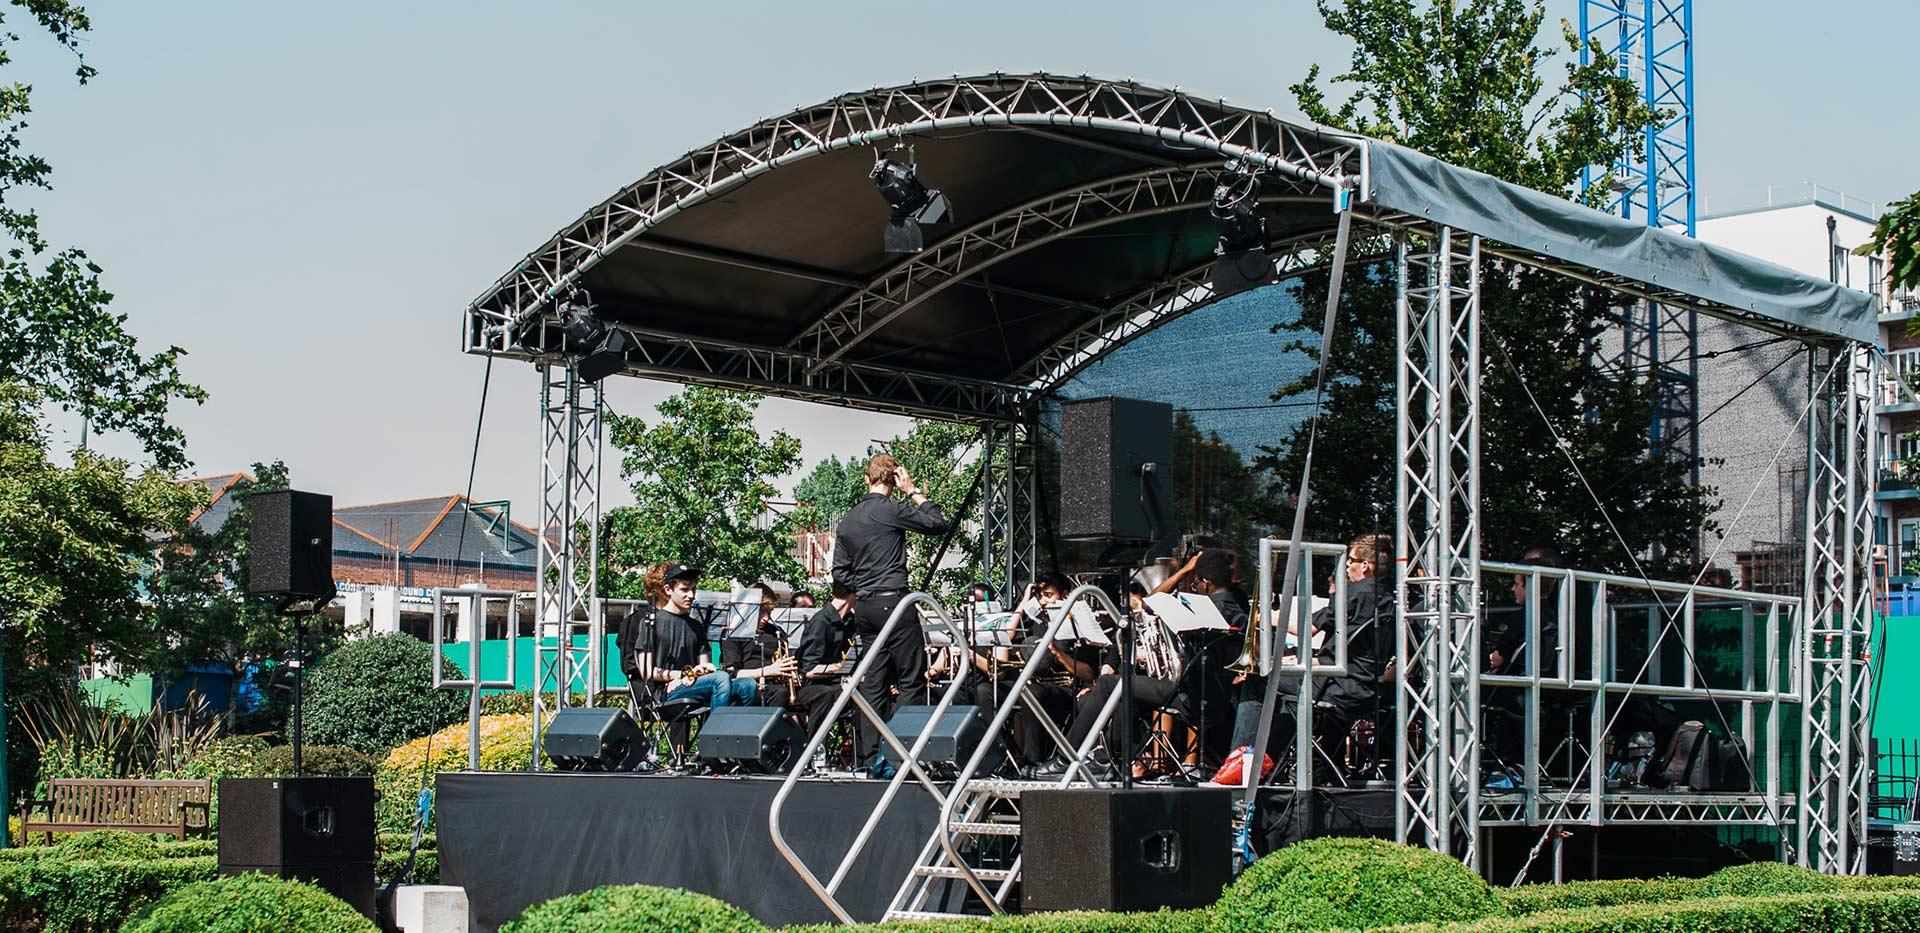 St George, Beaufort Park, Concert in the Park 2019